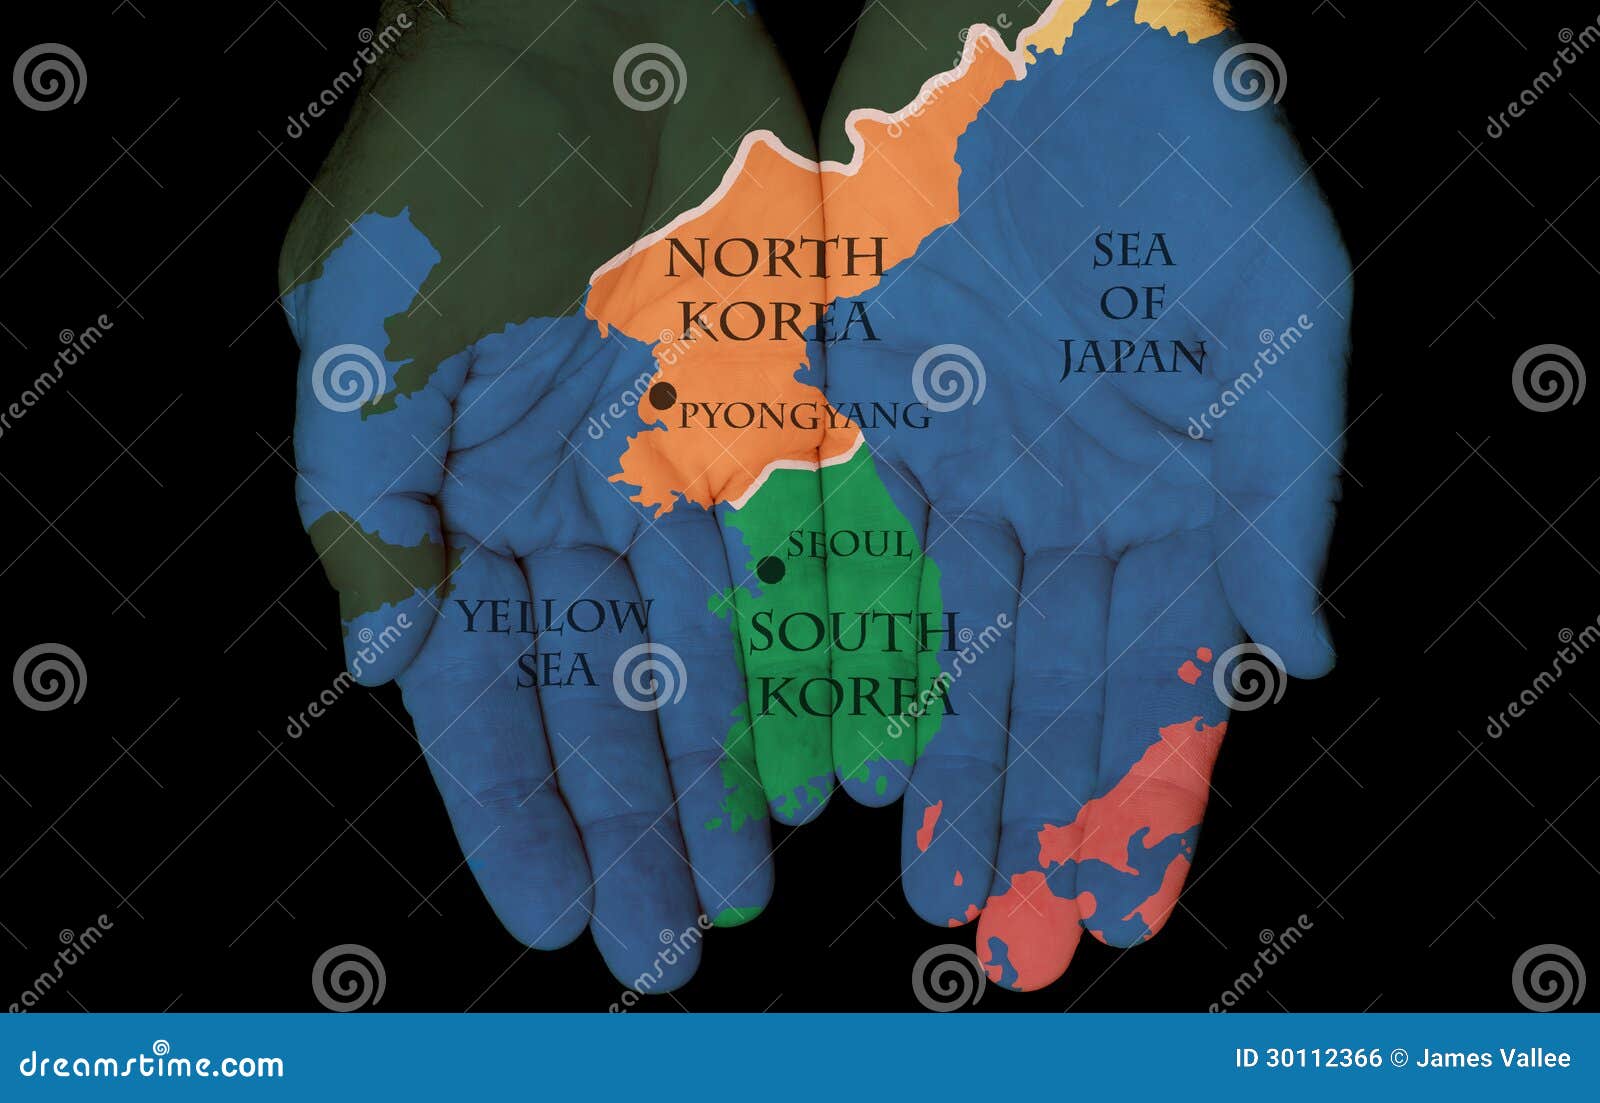 north korea - south korea in our hands